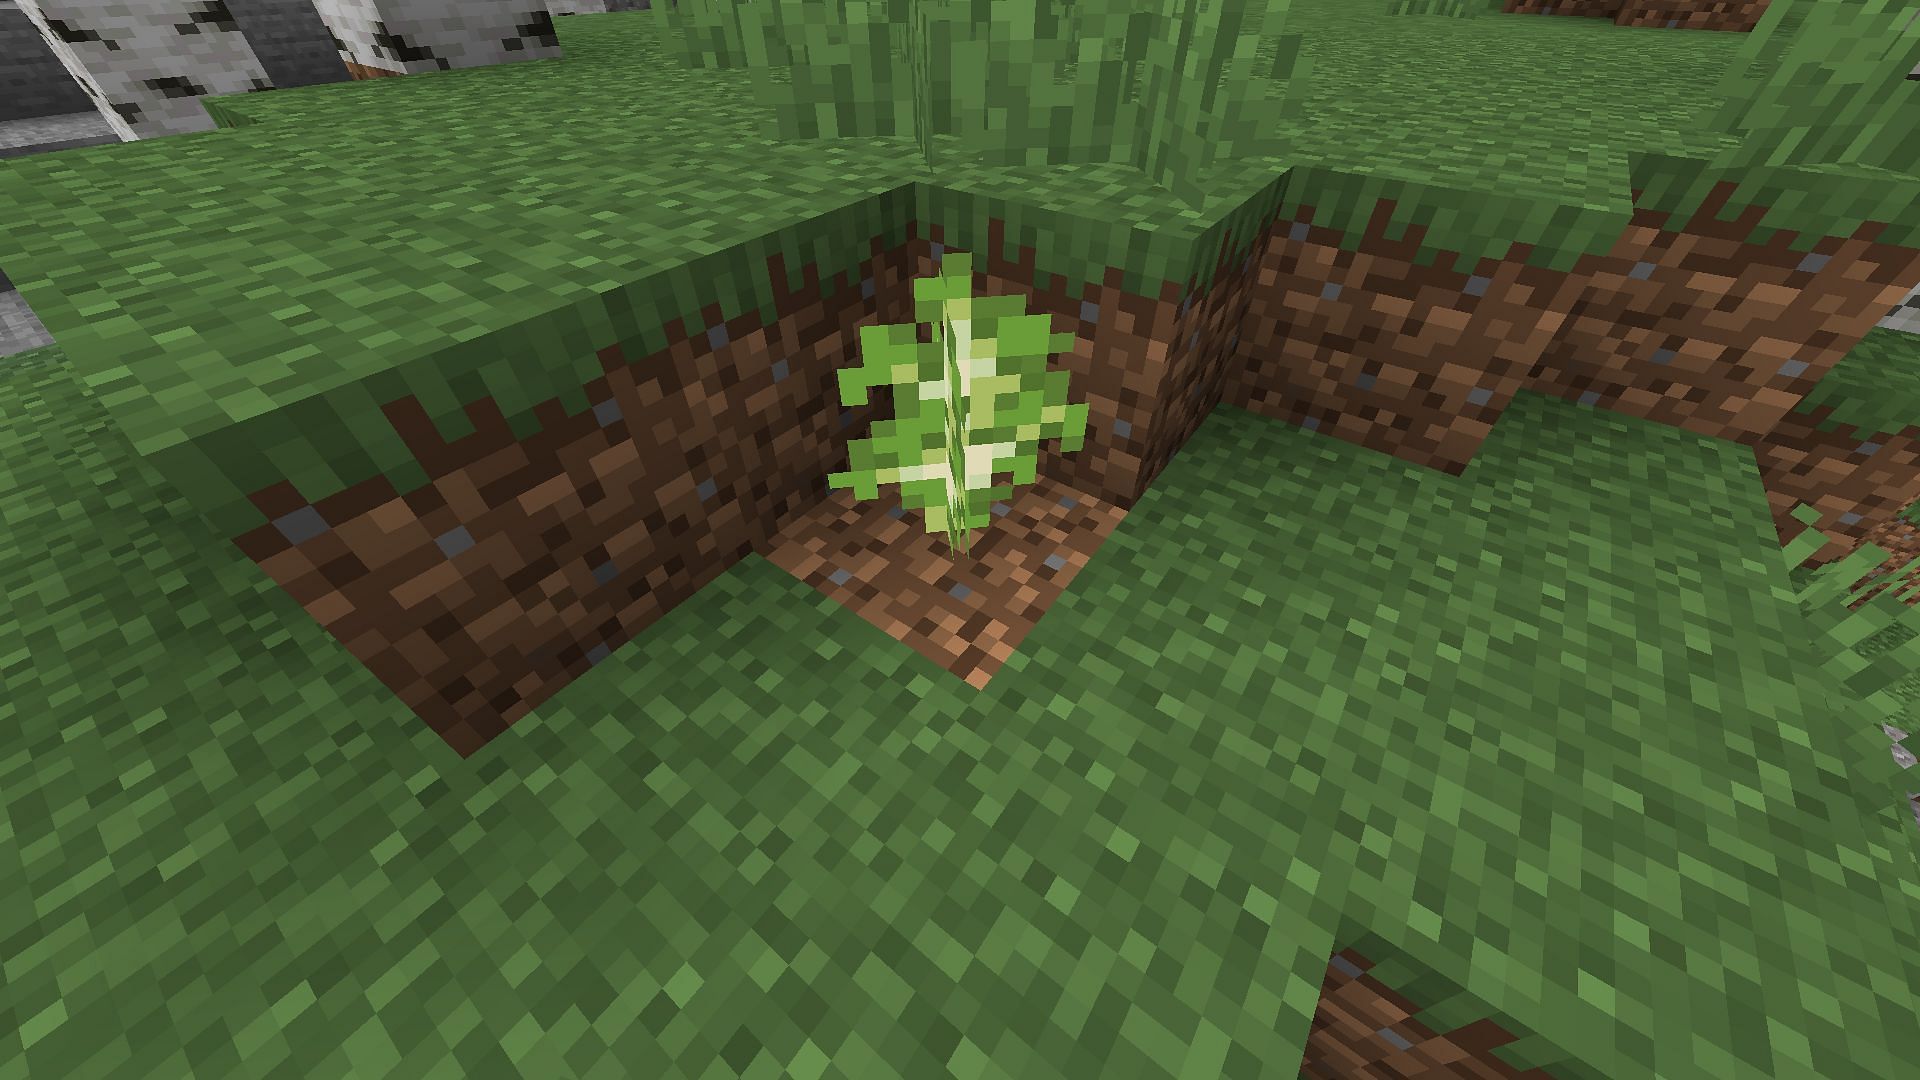 Players can also place saplings and other plants directly on dirt blocks in Minecraft (Image via Mojang)